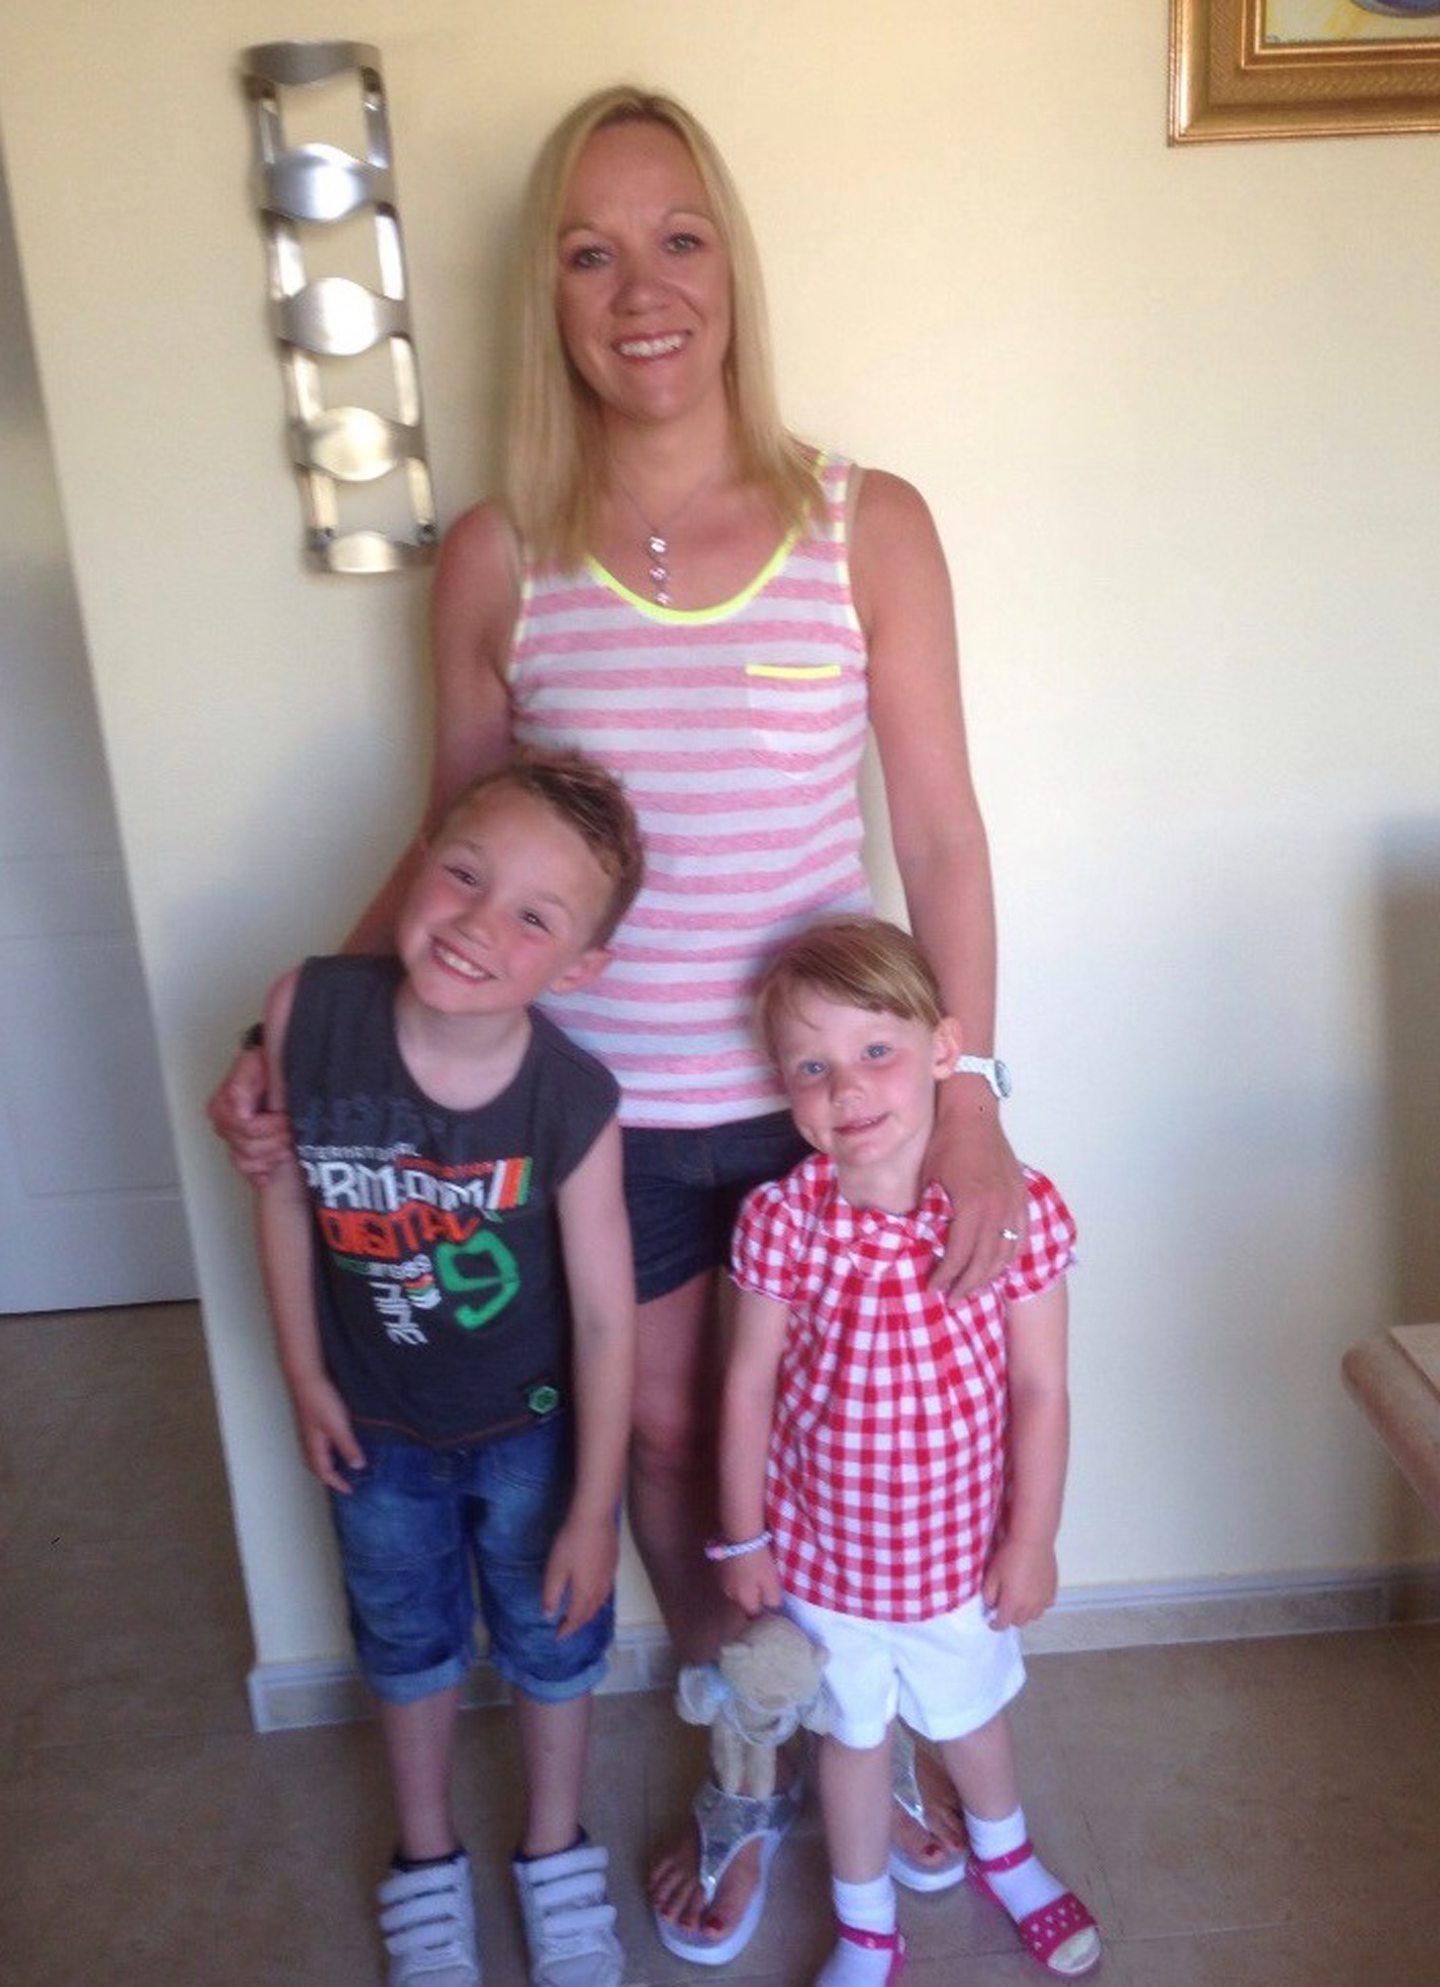 Suzanne's children Lauren and Max were young when she first fell ill in 2014. Image: Suzanne Davies